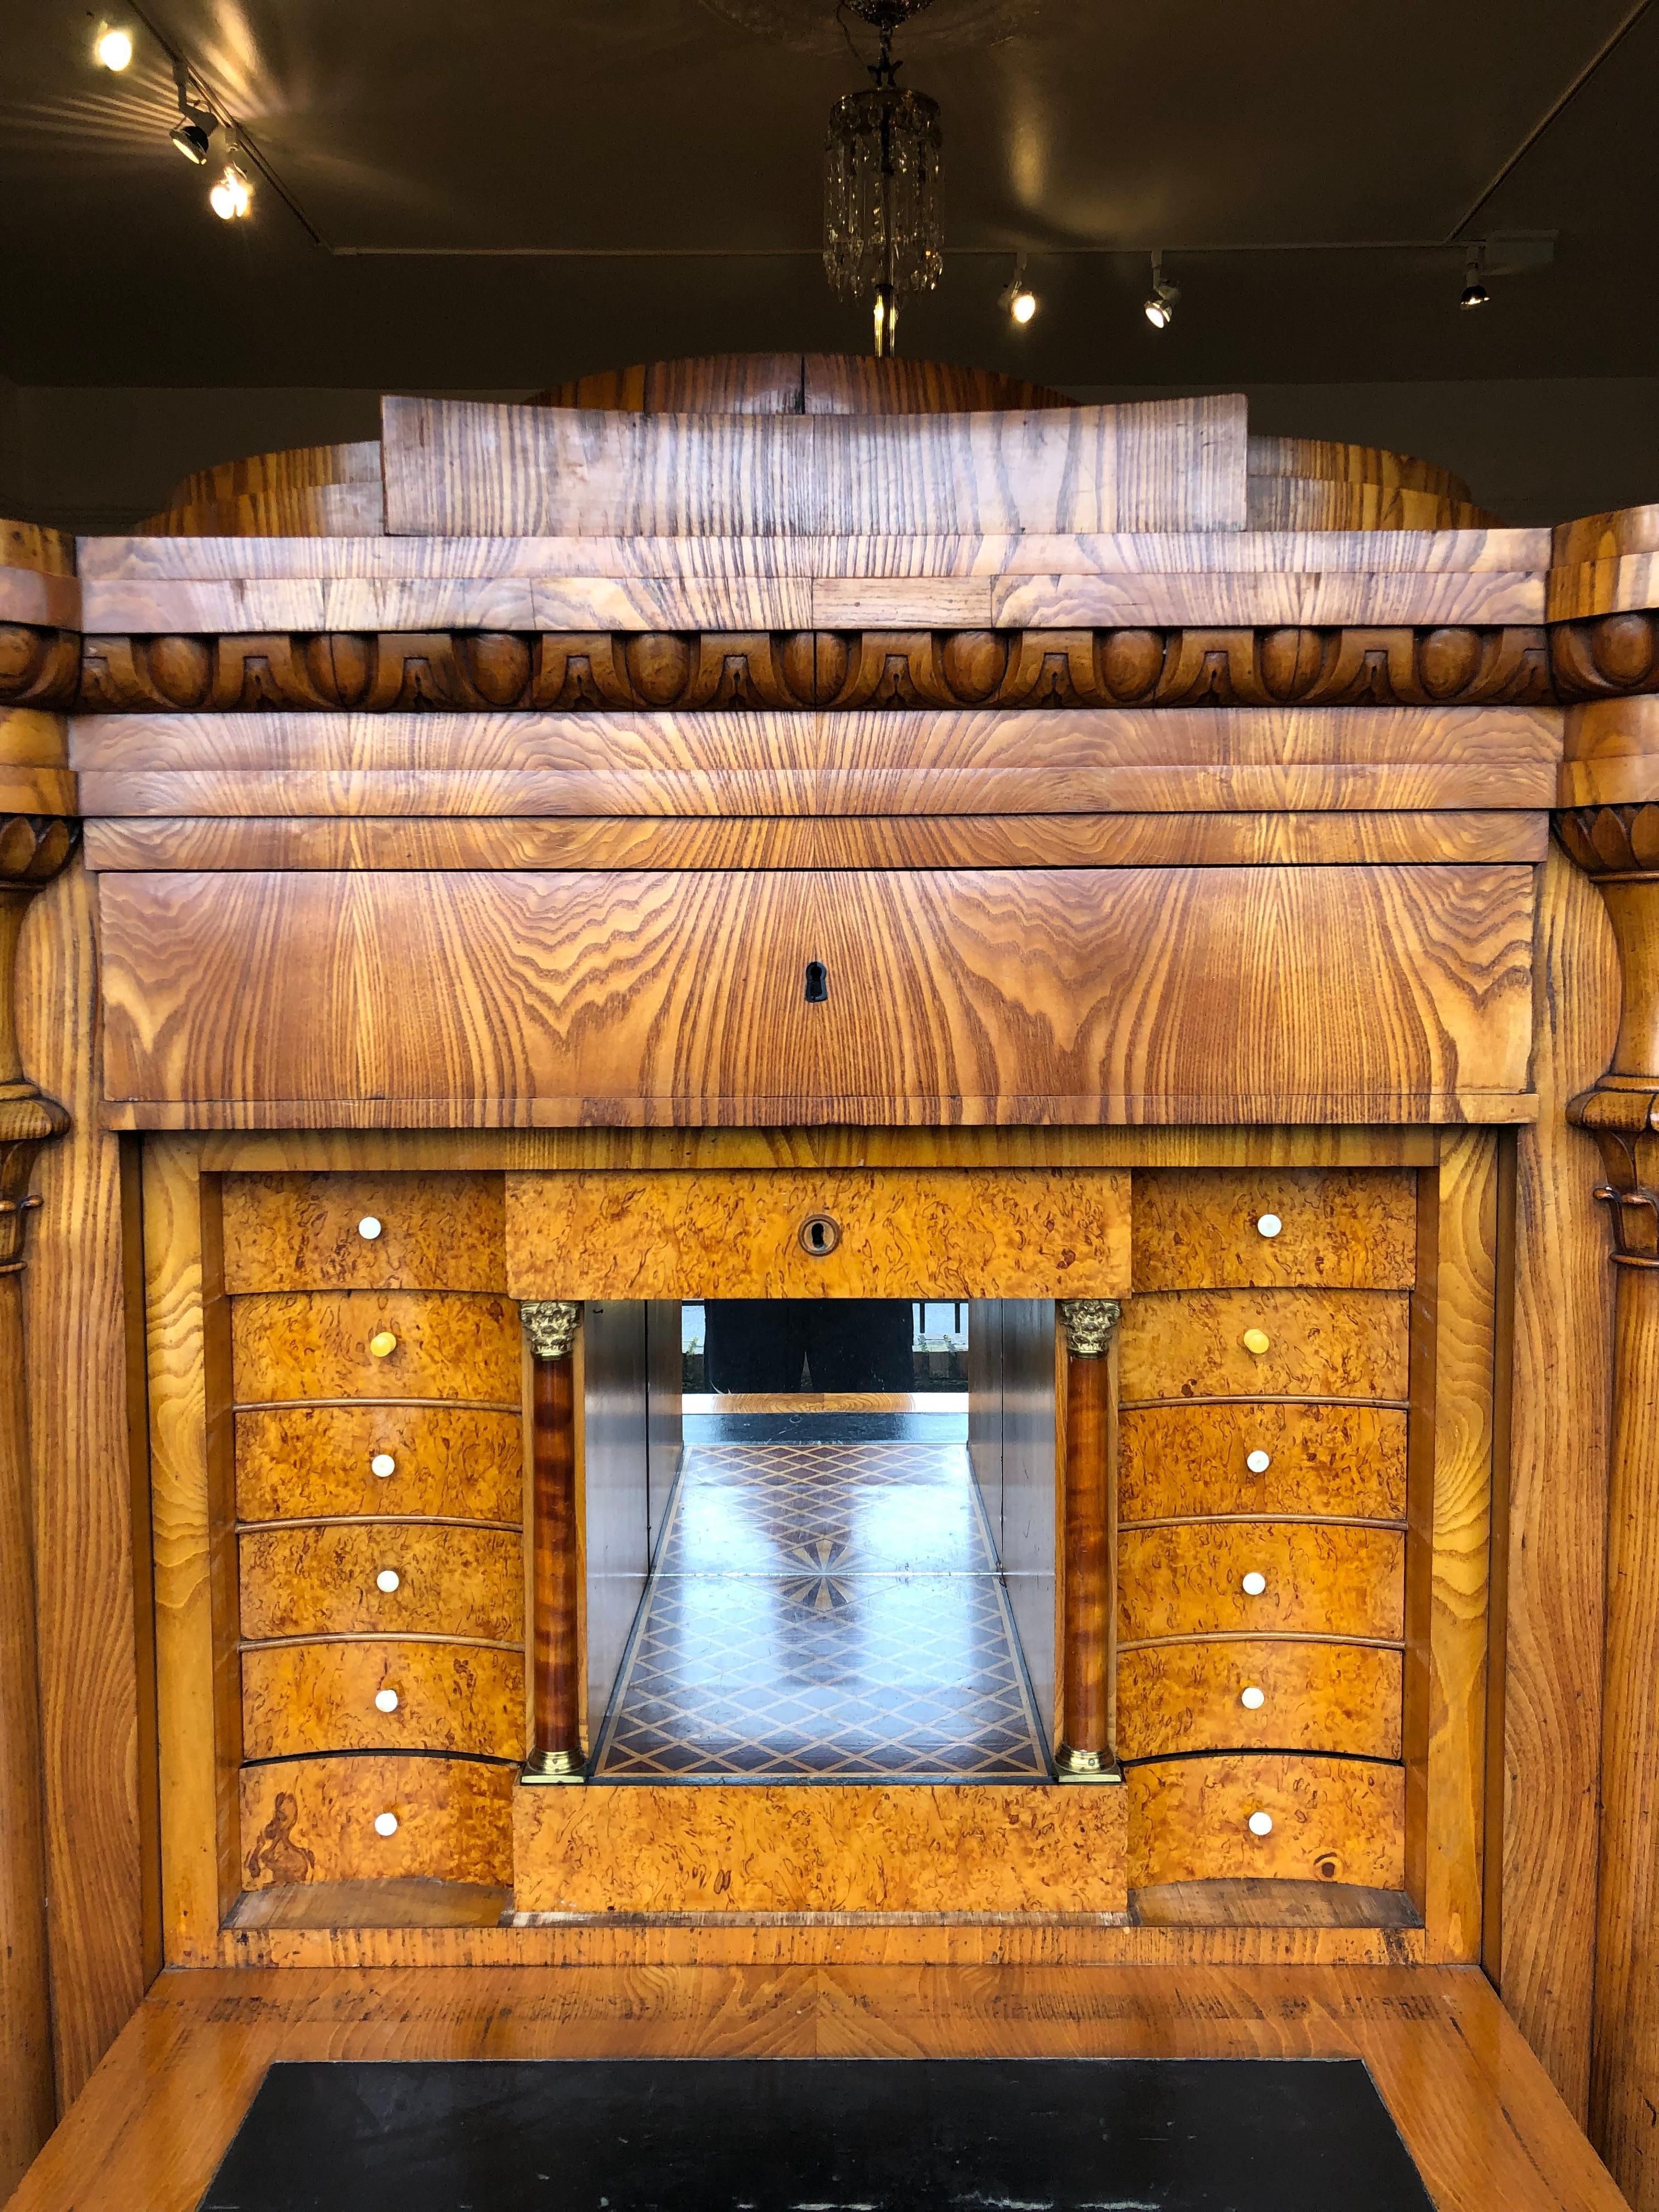 An impressive Biedermeier secretaire a abatant in Baltic walnut veneer.

Handsome substantial molding at the top. With bird's-eye veneer, inlaid and mirrored back interior. The drop down door is weighted and lowers easily. Can message for